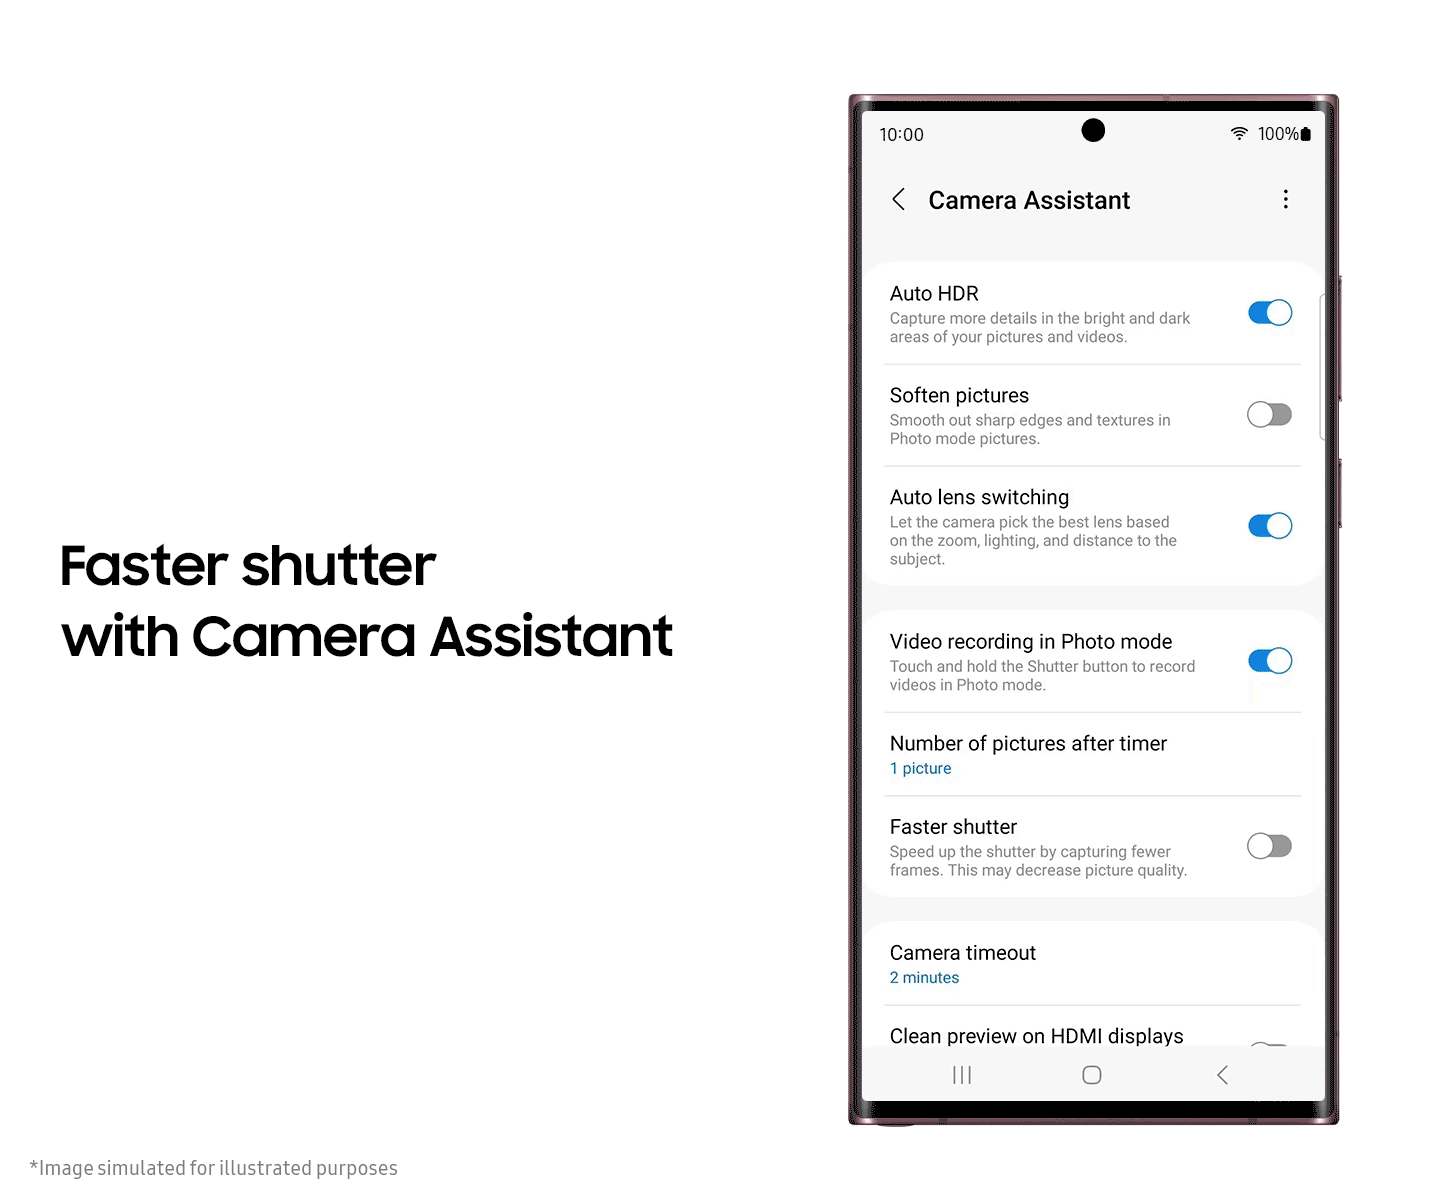 Faster shutter in Camera Assistant